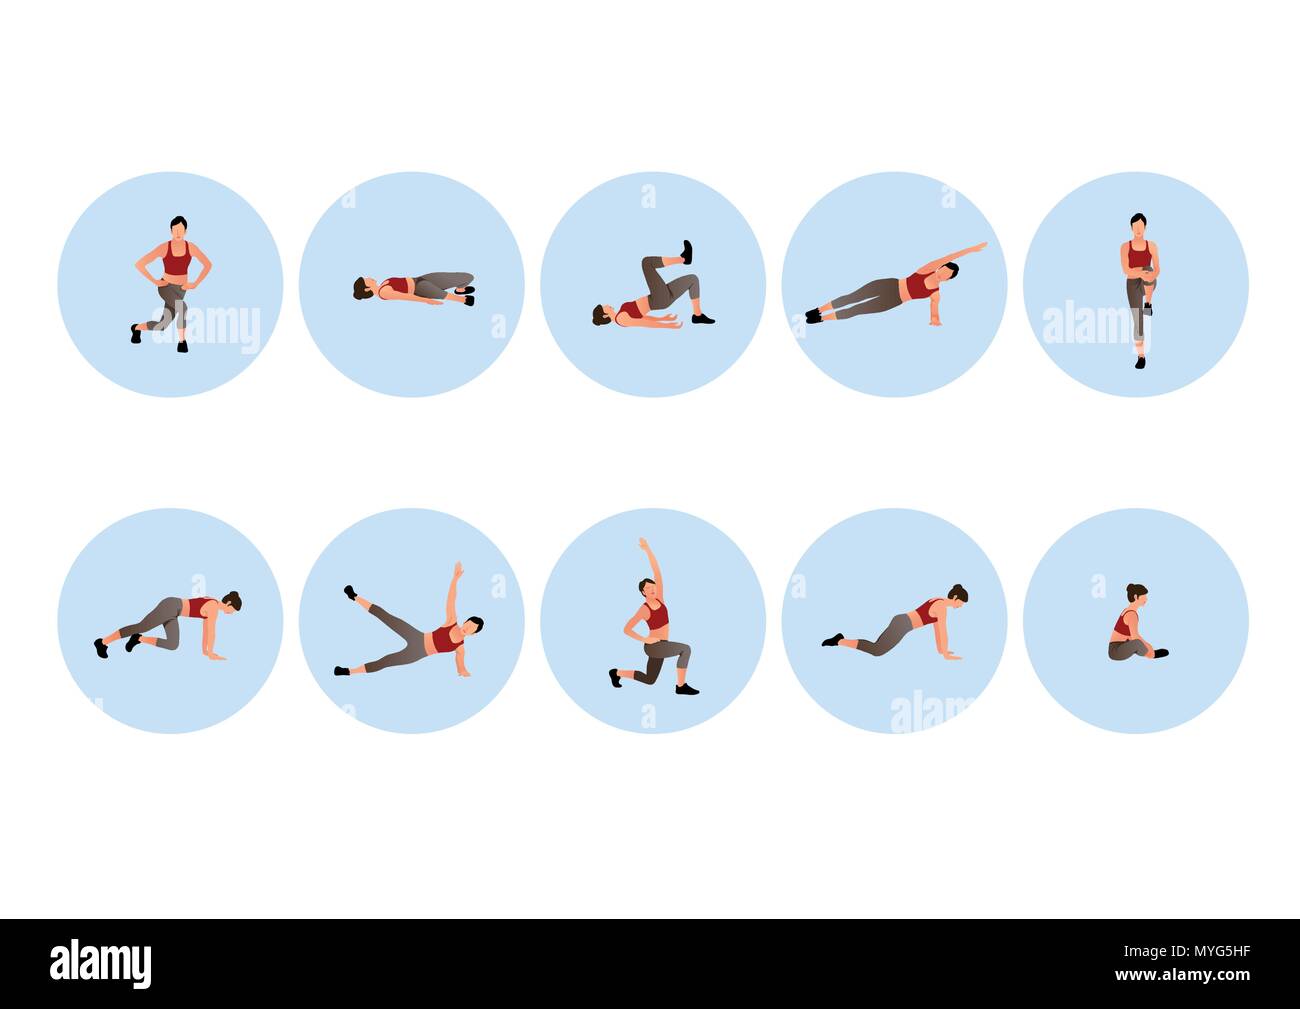 Training people icons set for sport and fitness. Flat style design vector illustration. 010 Stock Vector